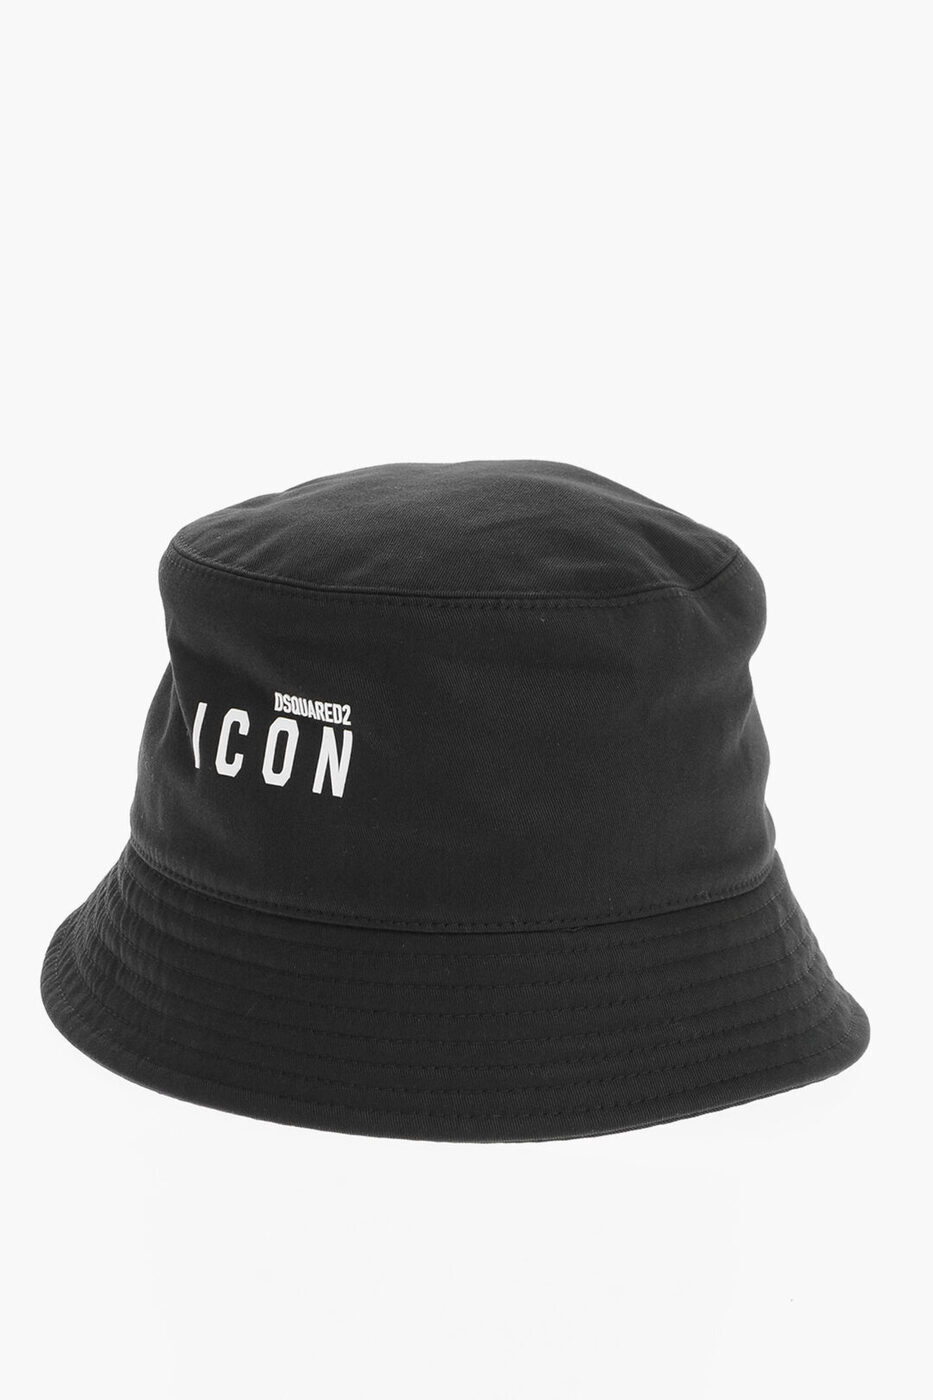 DSQUARED2 ディースクエアード 帽子 HAW003205C04312 M063 レディース SOLID COLOR BUCKET HAT WITH EMBOSSED LOGO 【関税・送料無料】【ラッピング無料】 dk